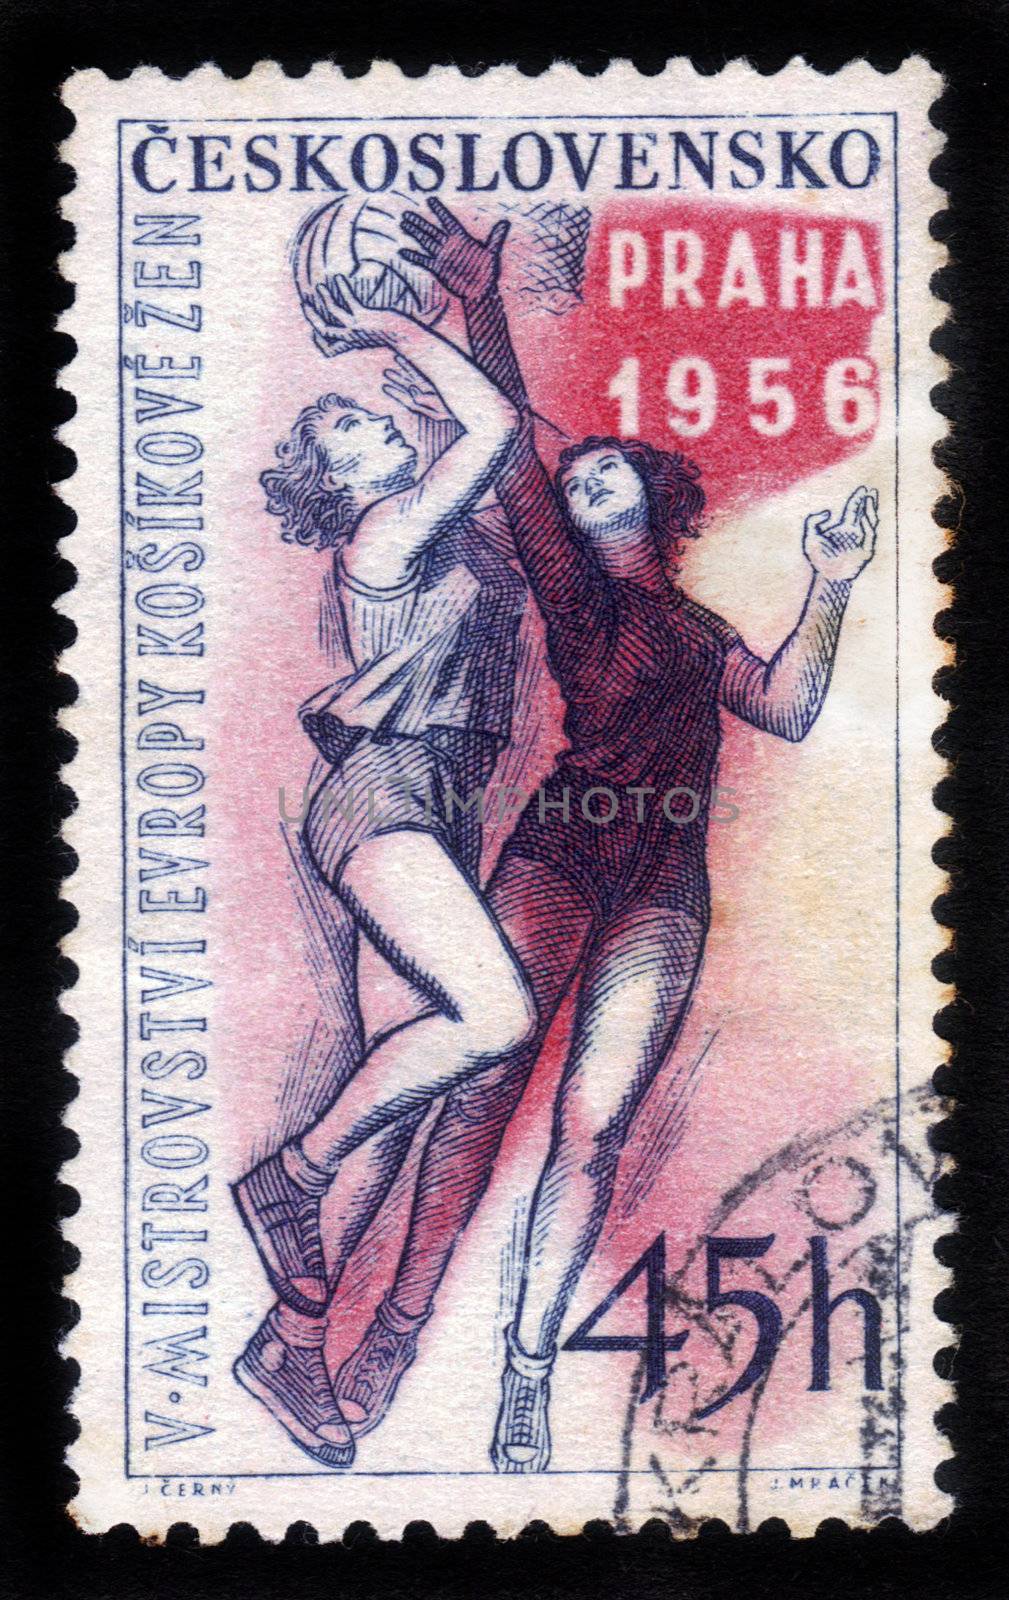 CZECHOSLOVAKIA - CIRCA 1956: stamp printed by Czechoslovakia, shows competition in women's basketball in Prague , circa 1956